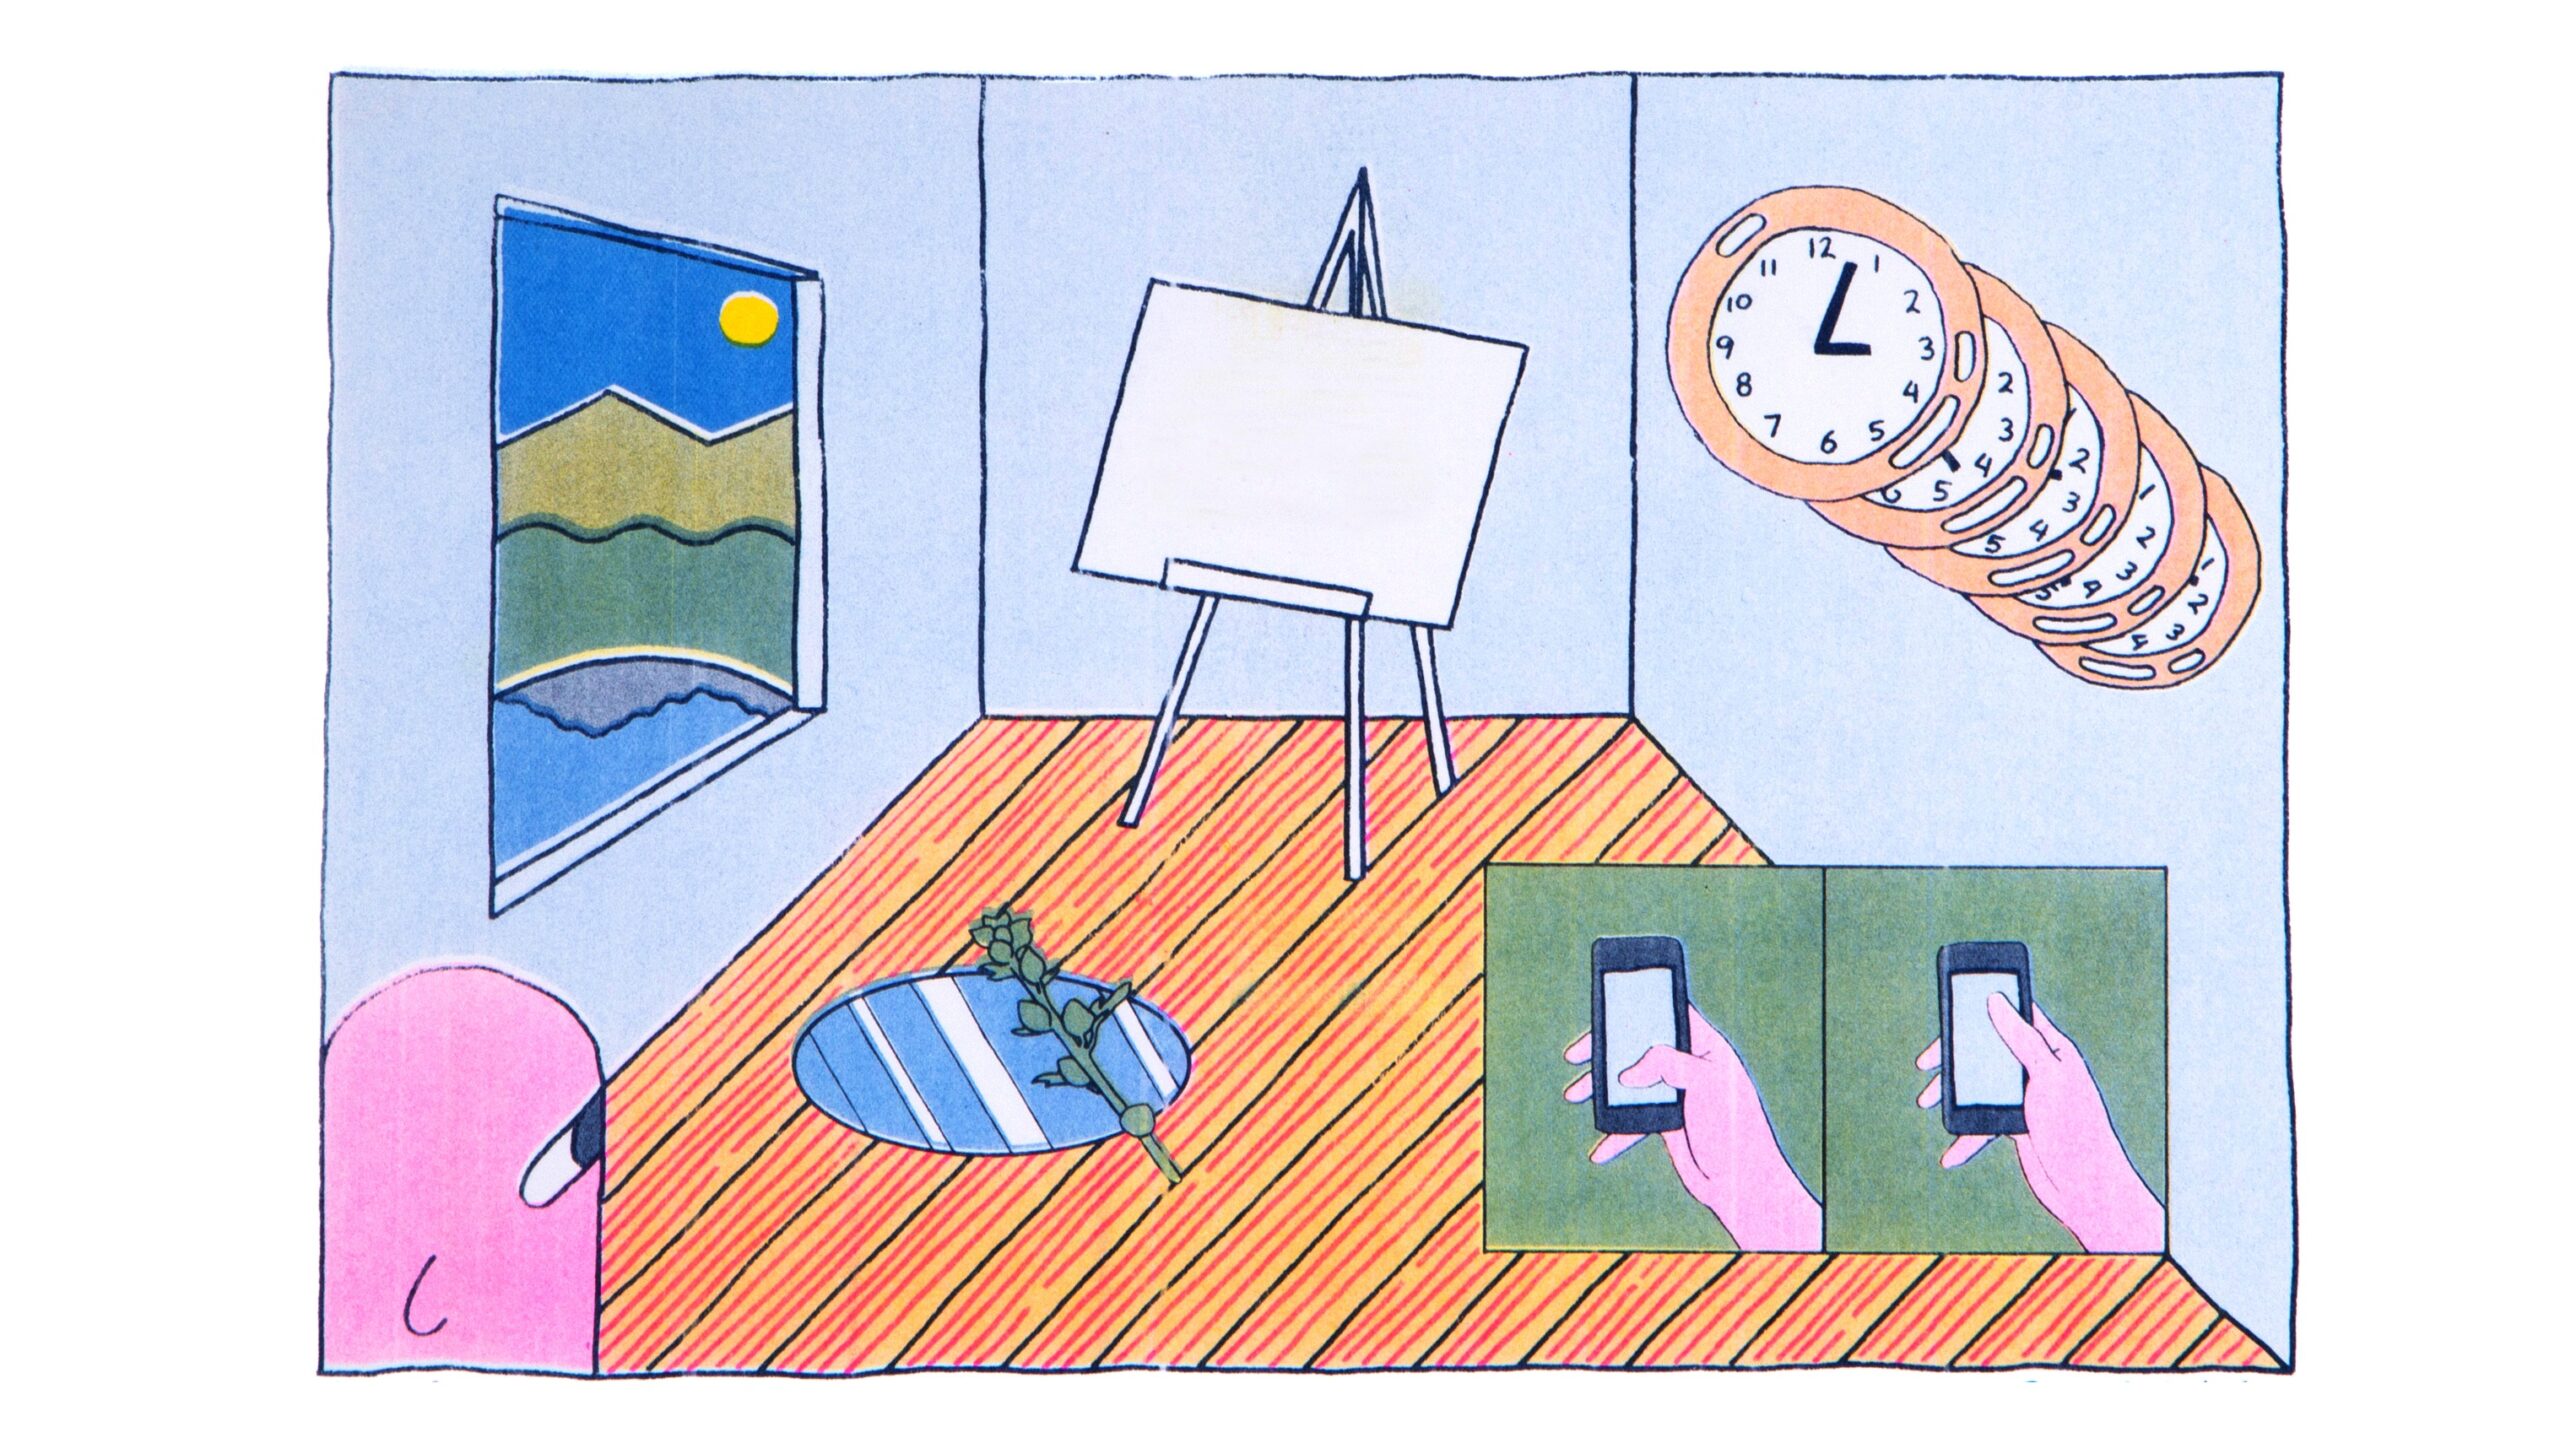 Riso printed illustration of an art studio, depicting a blank canvas, a flower in a puddle on the hardwood floor, clocks on the wall, and a 2-panel comic showing a thumb swiping up on a smart phone.